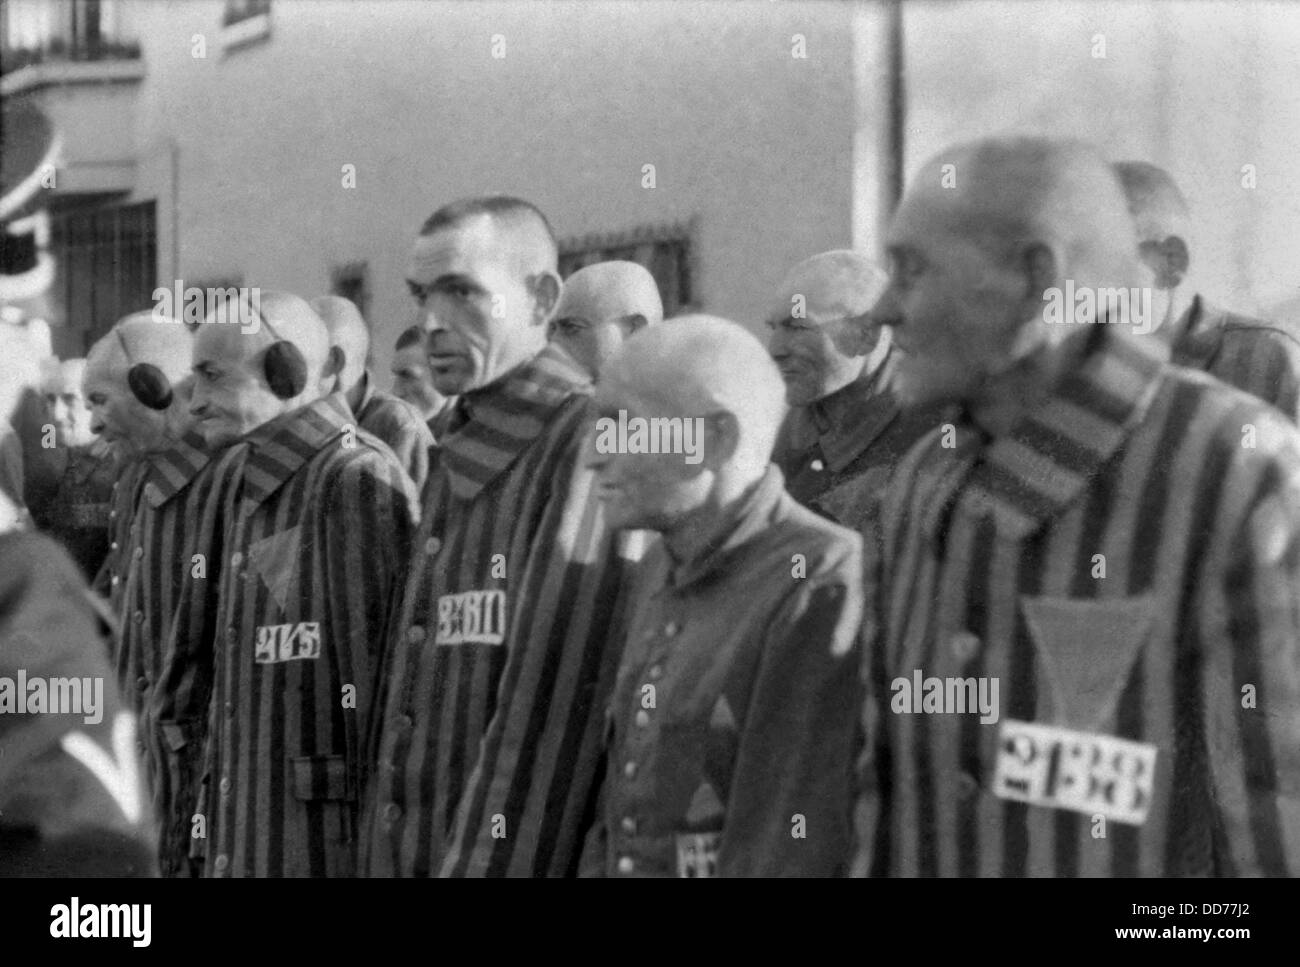 Prisoners in the concentration camp at Sachsenhausen, Germany, Dec. 19, 1938. Located 22 miles north of Berlin, it was near the Stock Photo